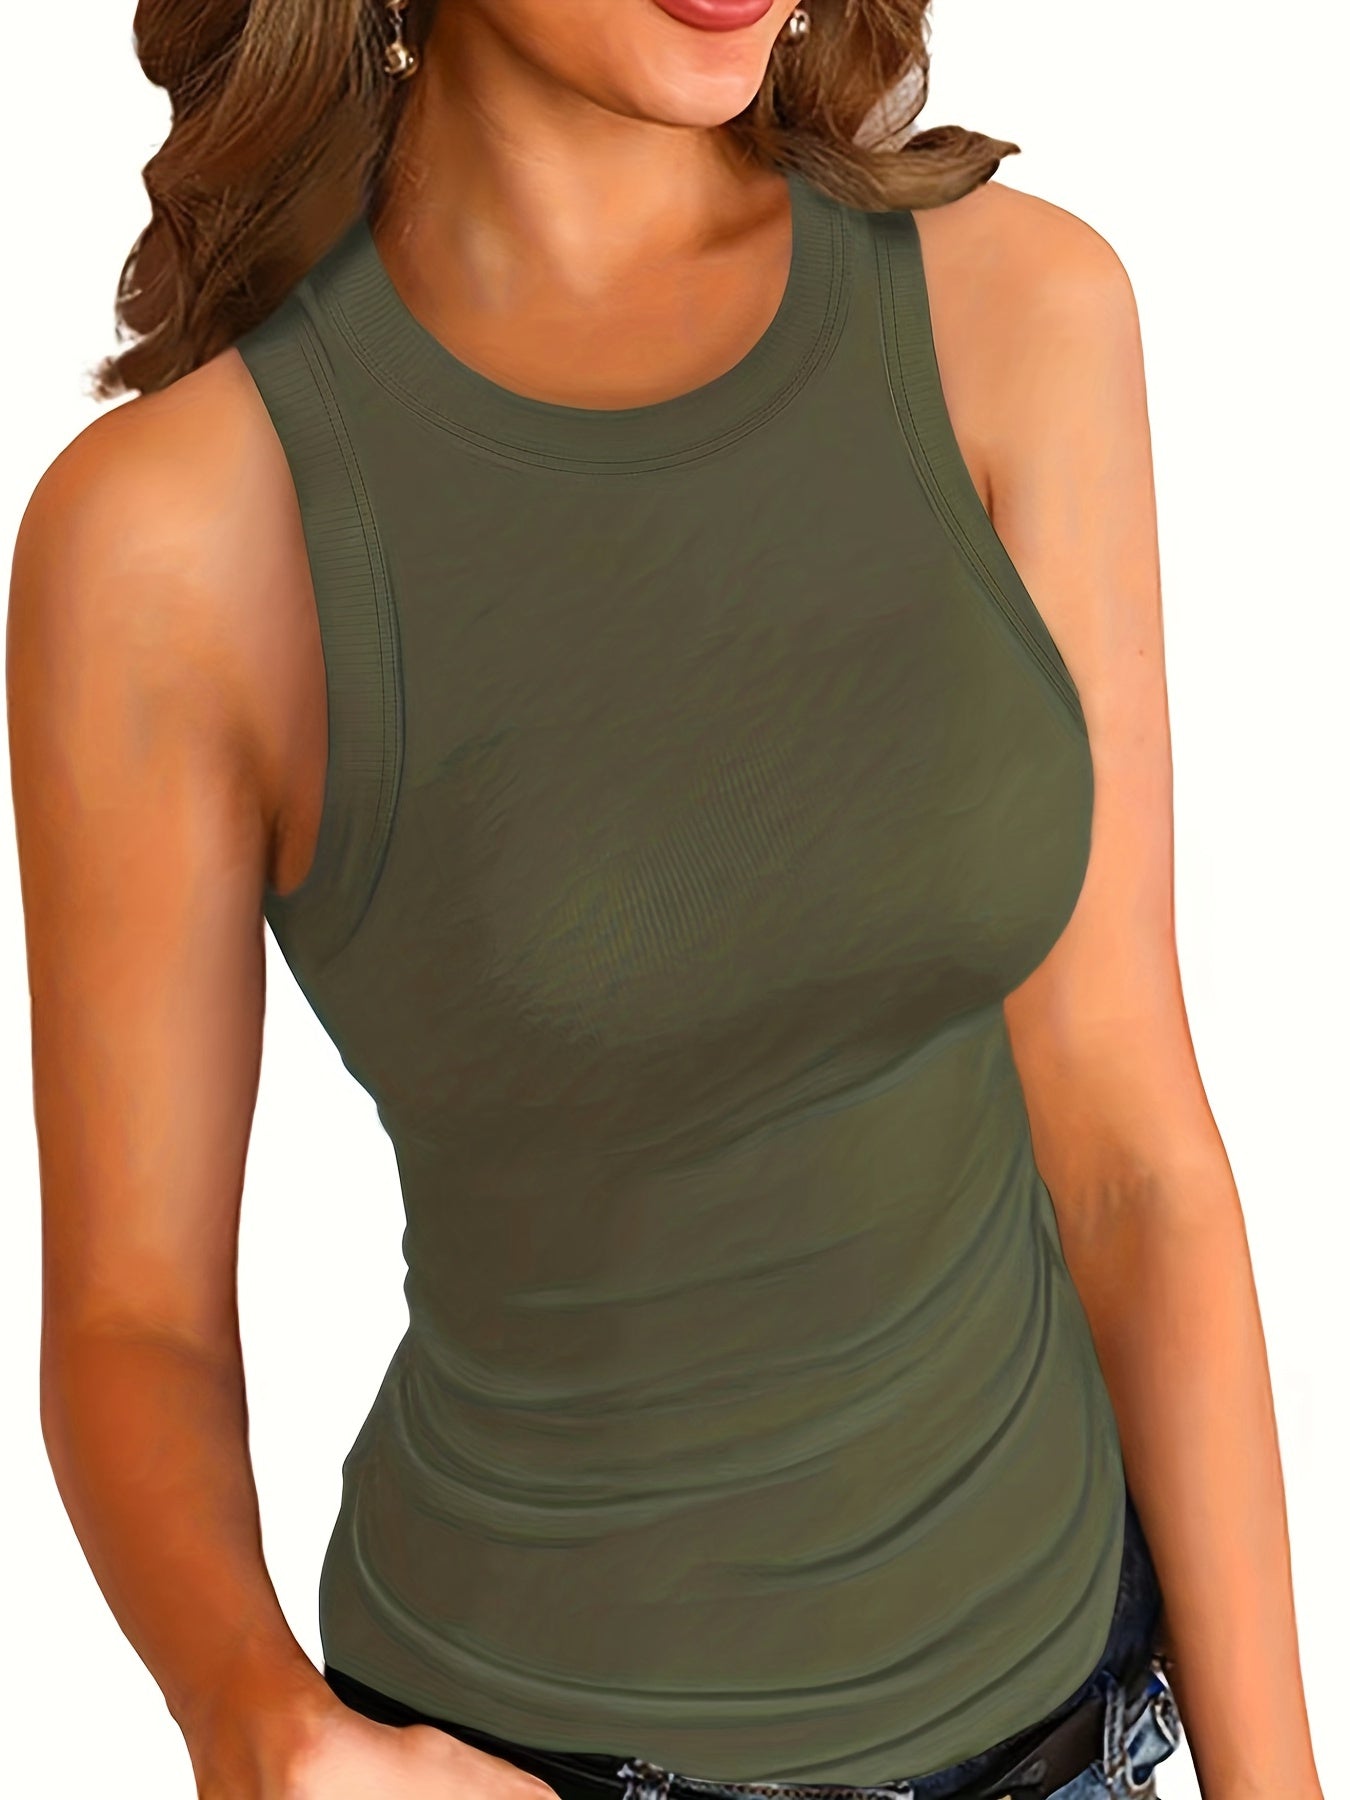 Antmvs Women's Stylish Sleeveless Sports Tank Top - Perfect For Fitness & Casual Wear!